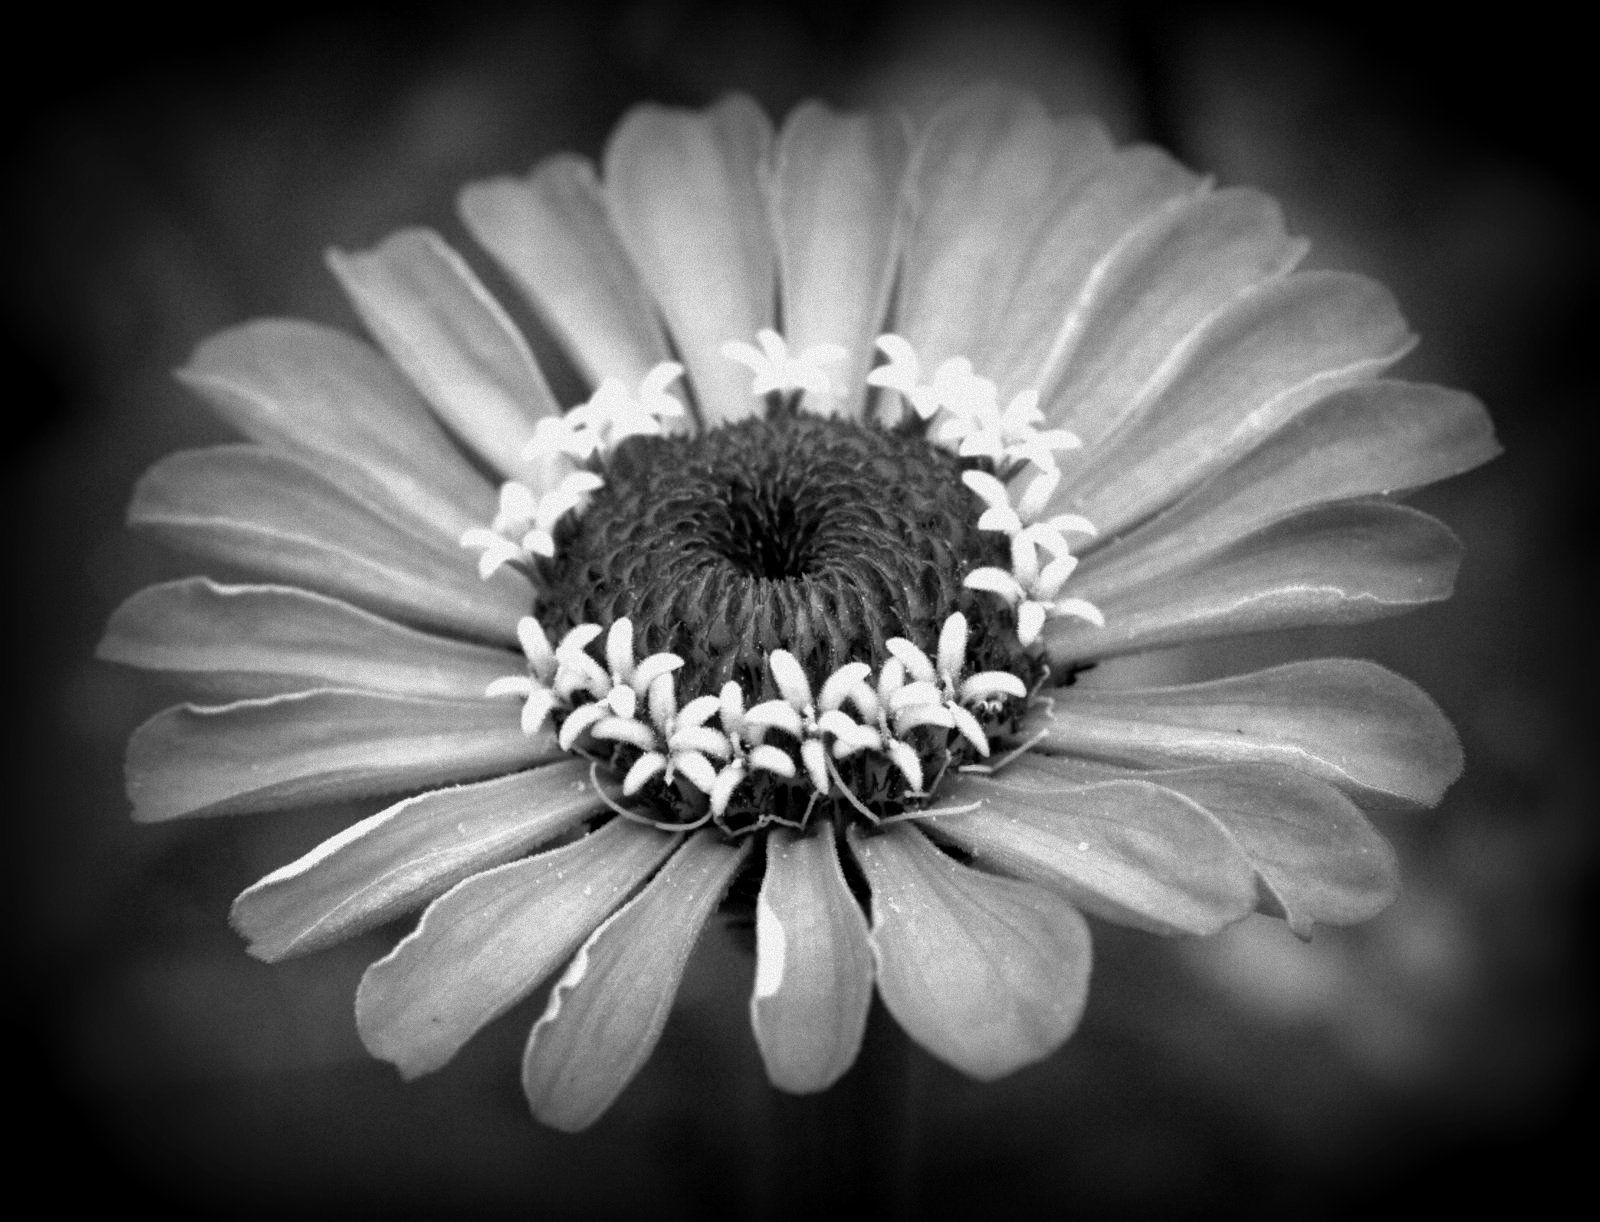 B&W Flower | Flower photography | Pinterest | Flower photography and ...